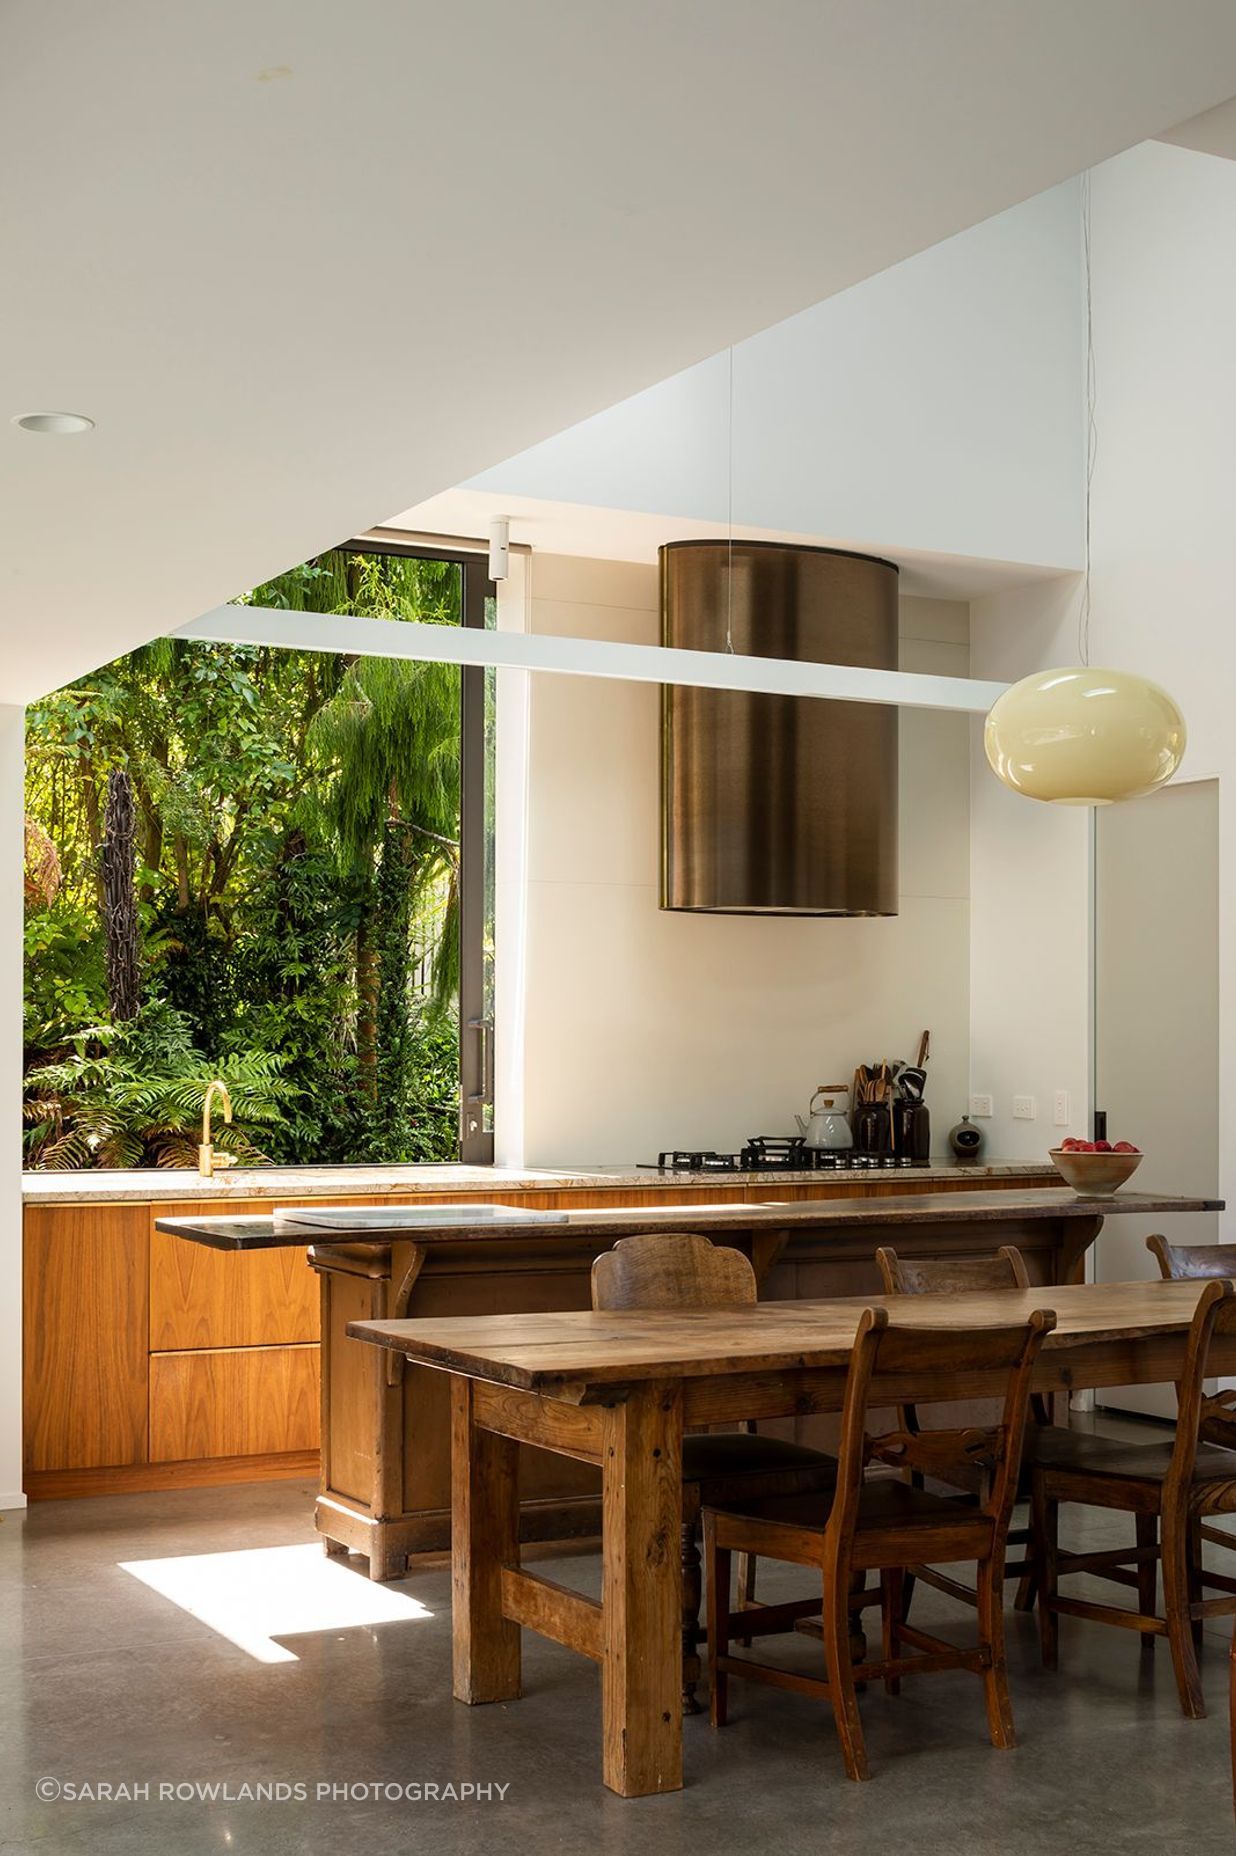 The large sliding kitchen window gives a jaw-dropping picture view to the native bush reserve.